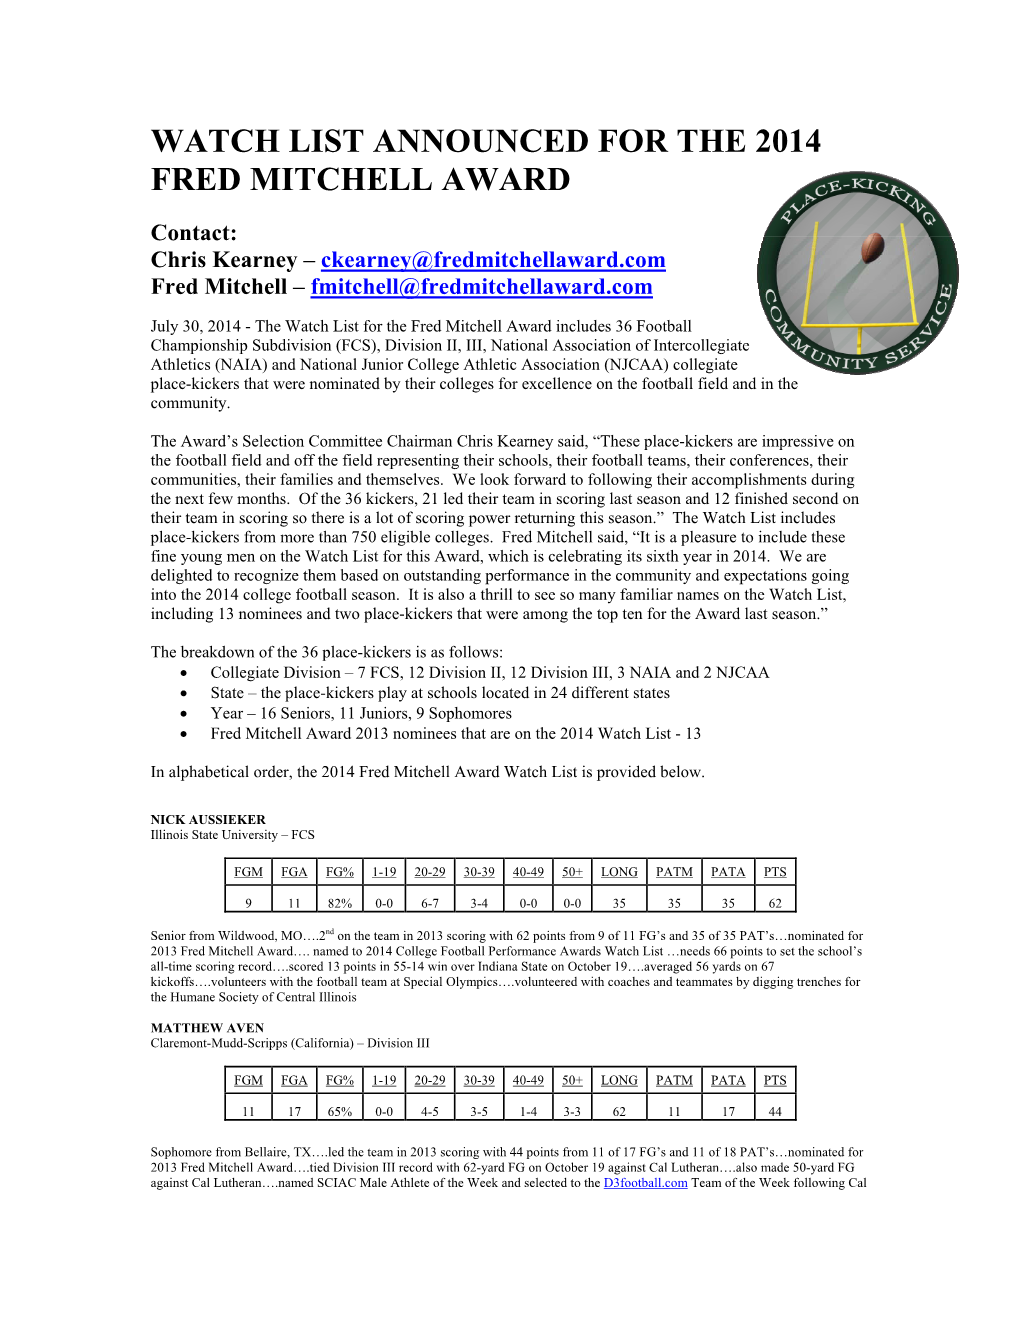 Watch List Announced for the 2014 Fred Mitchell Award